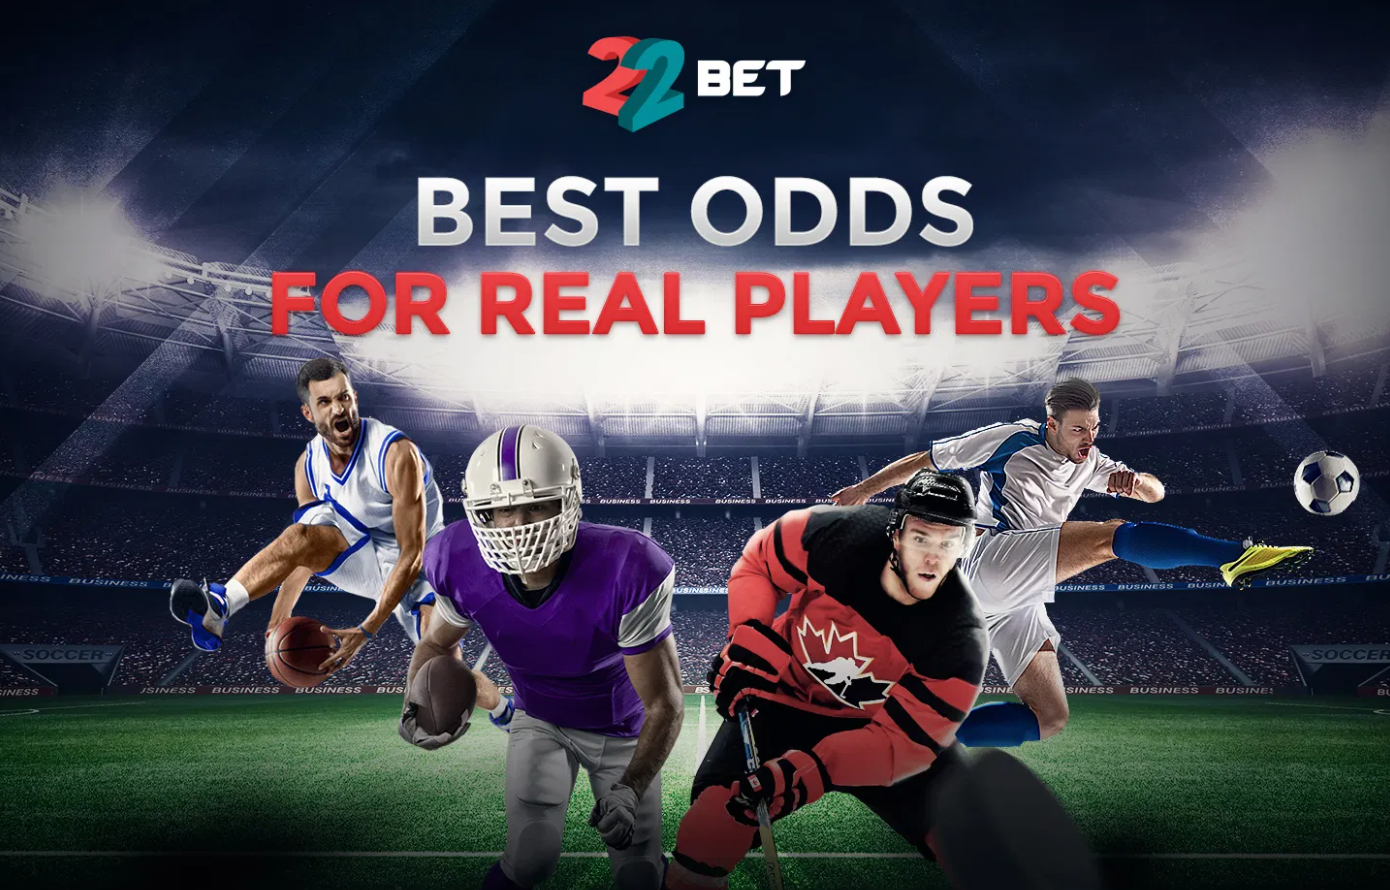 Check out the online casino at 22Bet